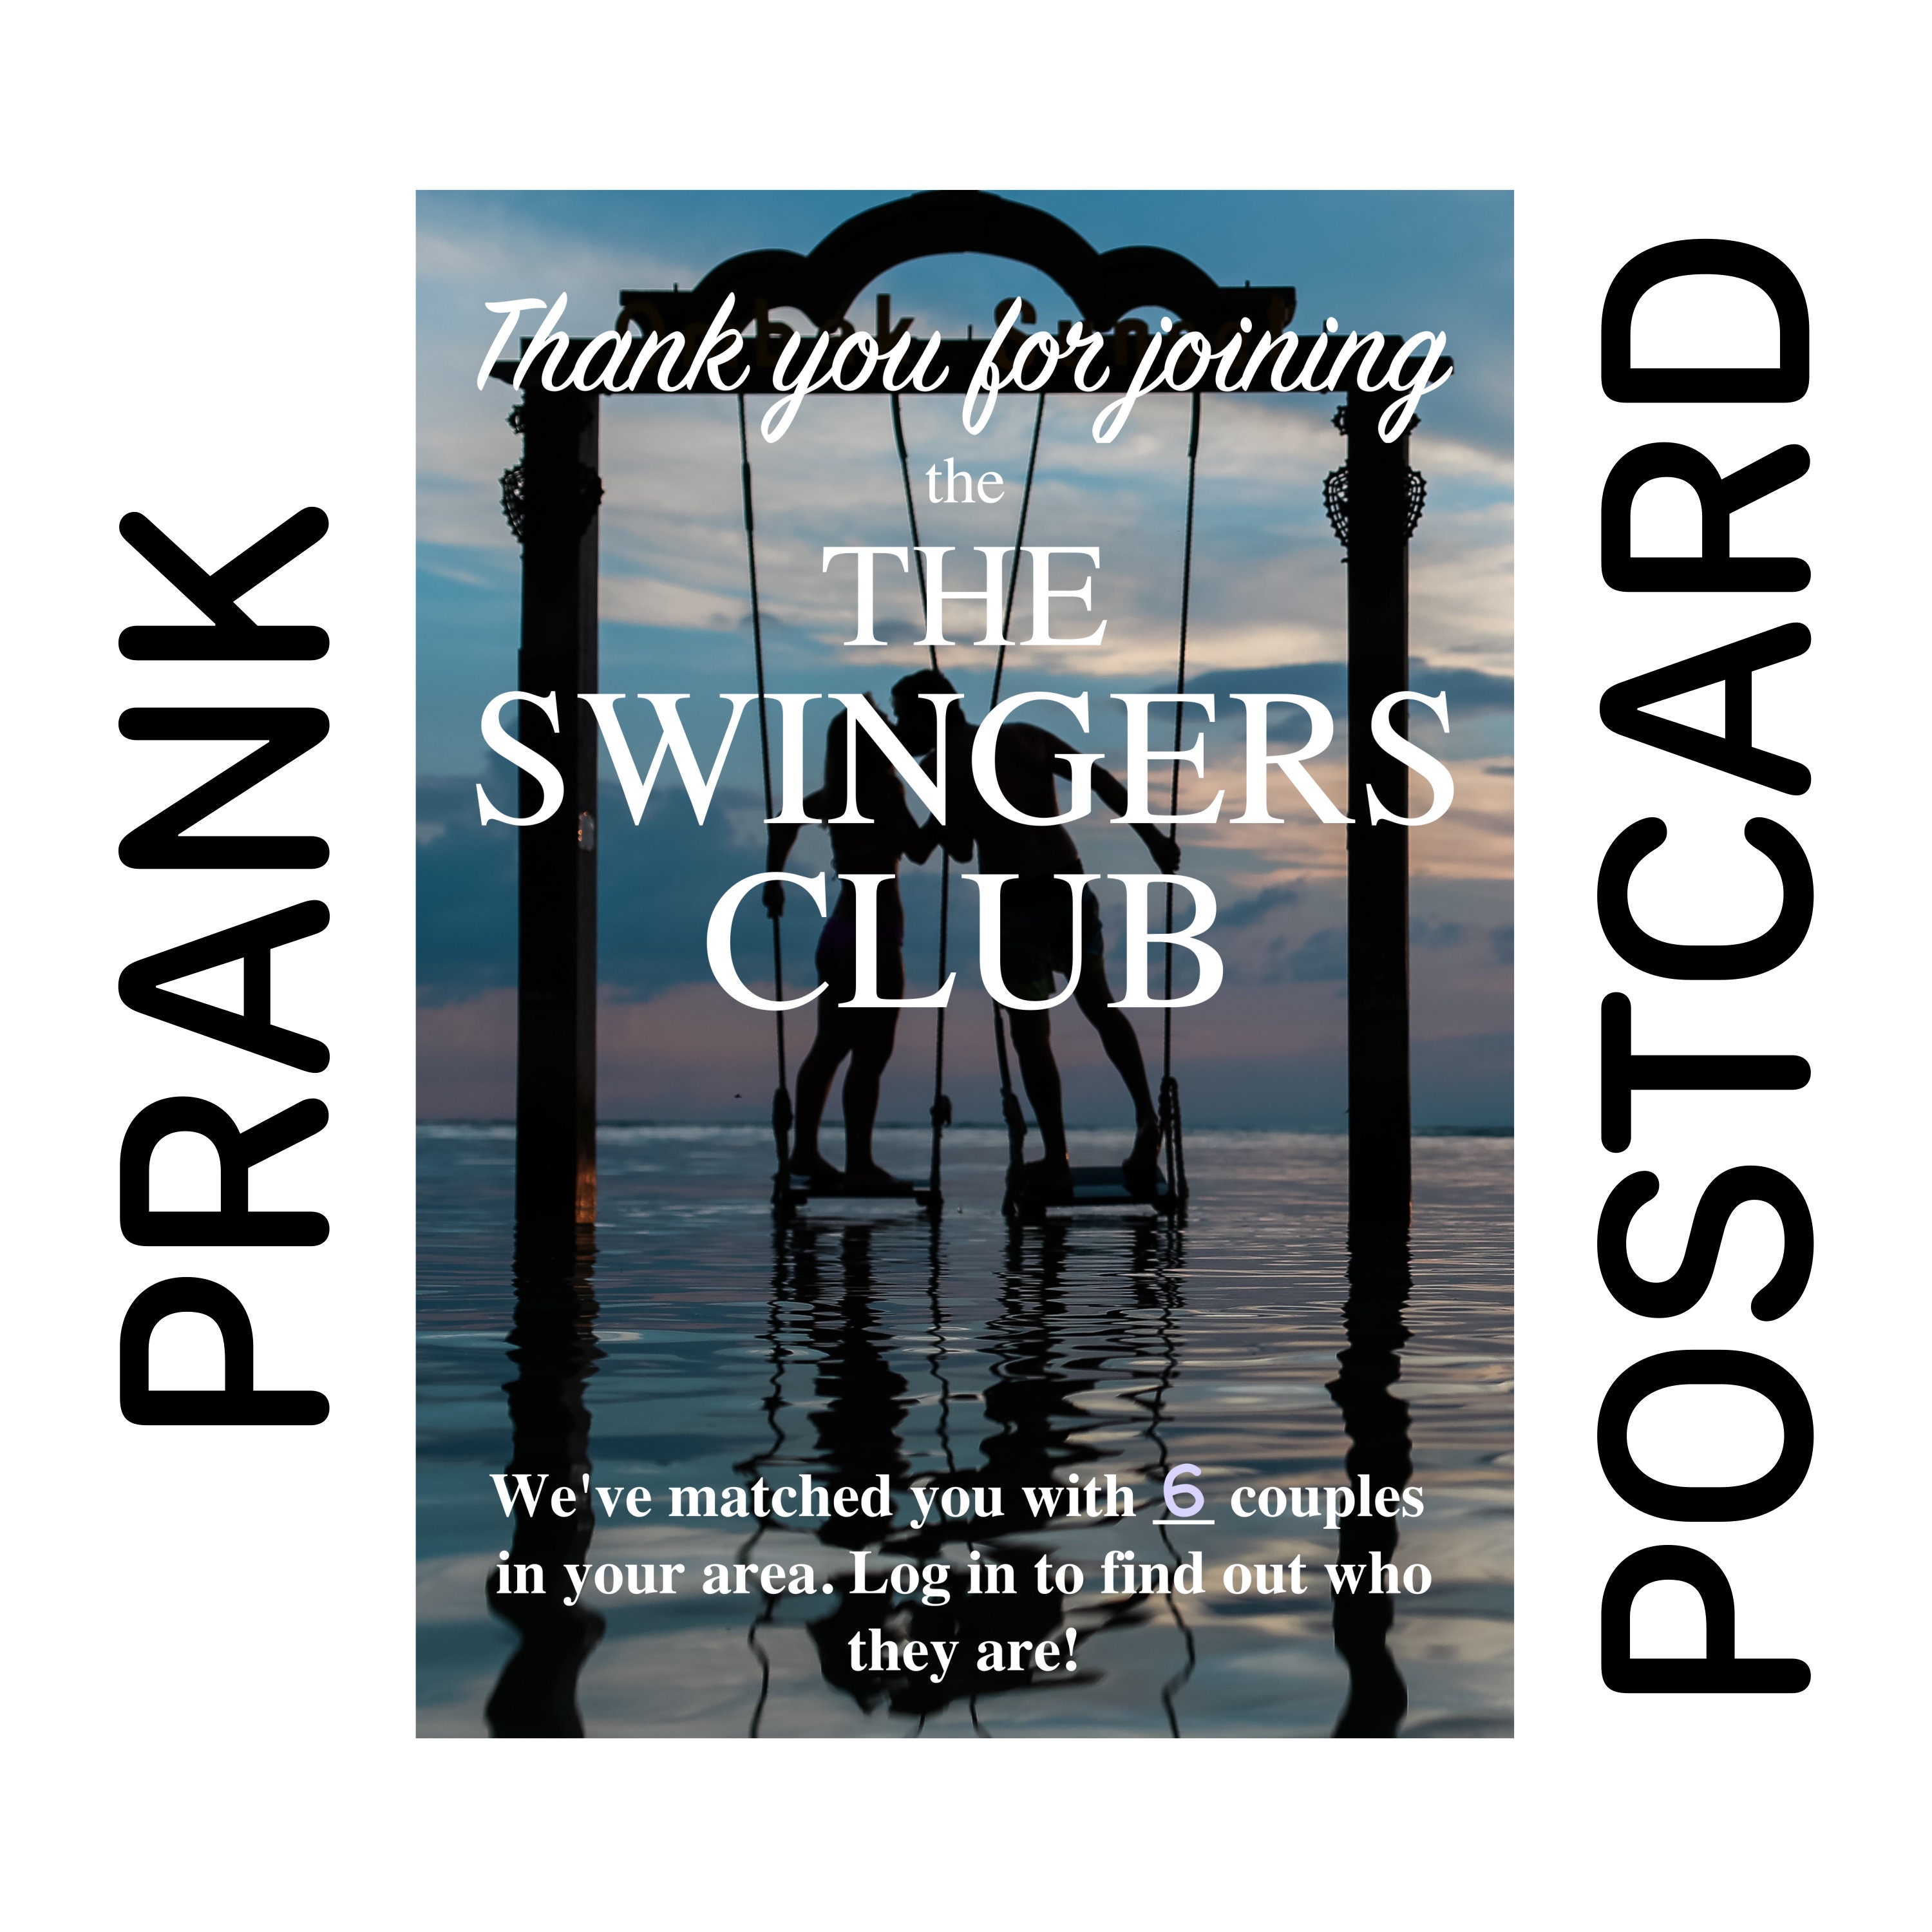 SWINGERS CLUB Gag Prank Mail Postcard Card Gift Funny pic image